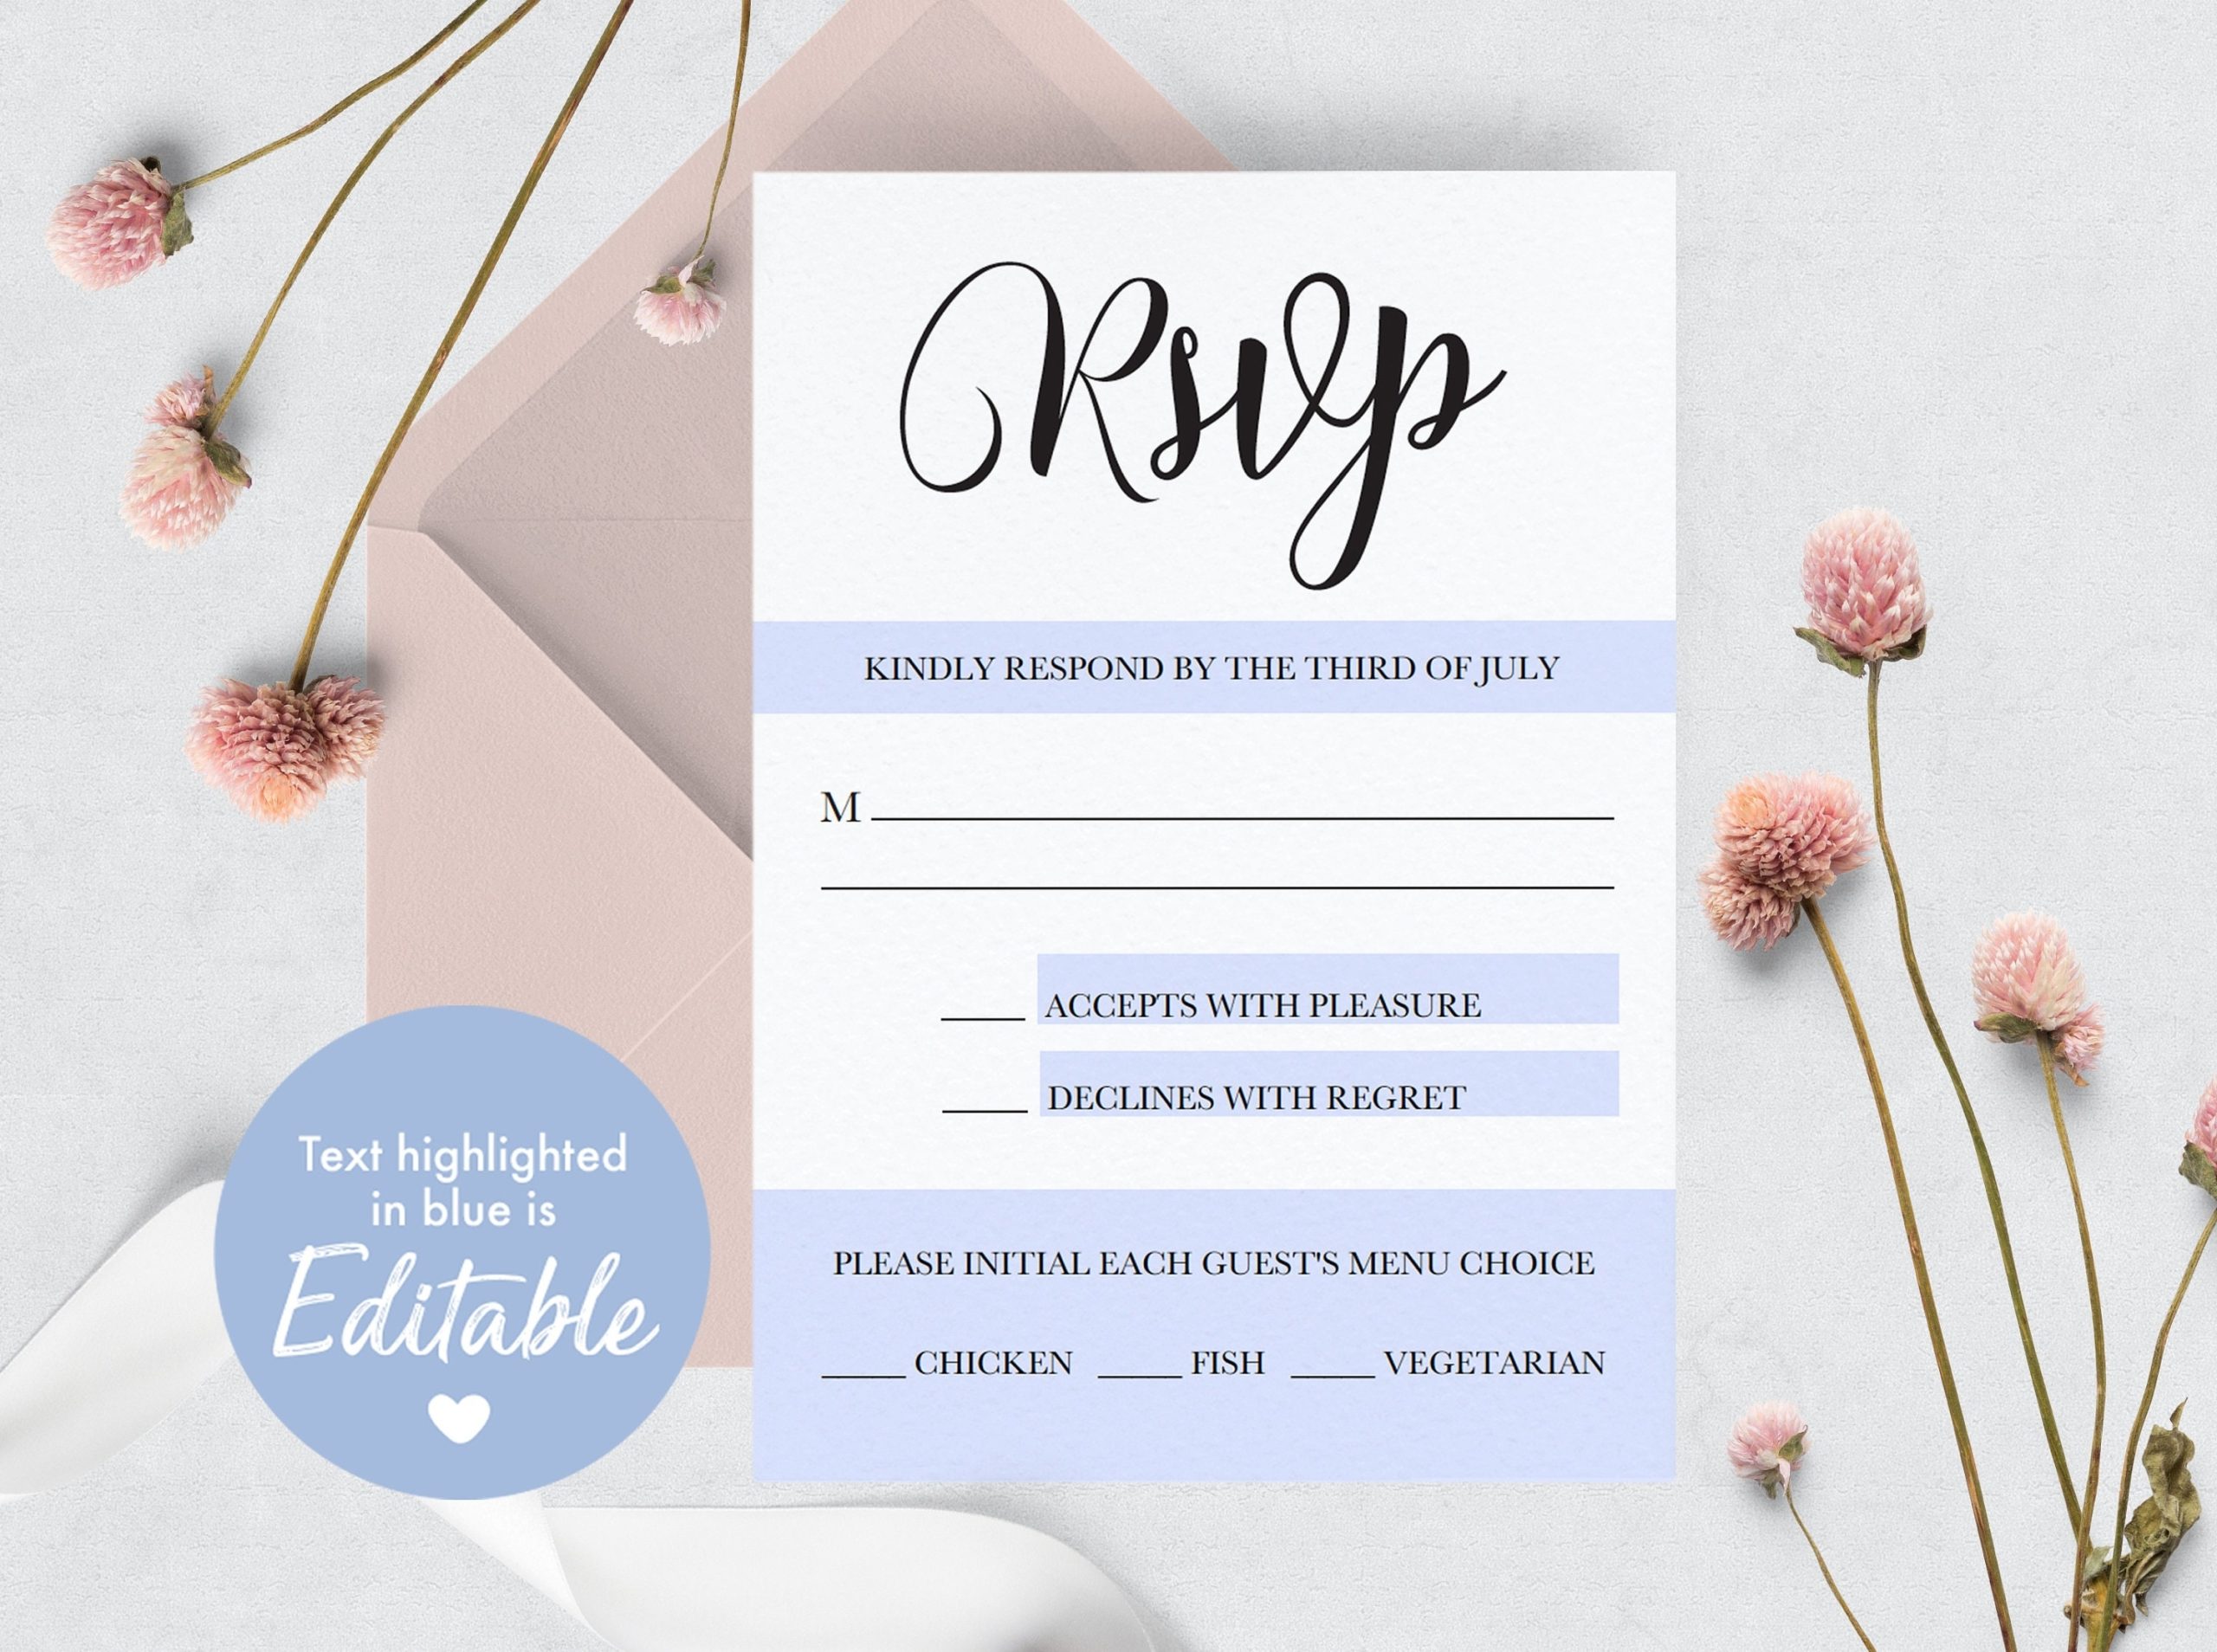 Wedding Rsvp Card Template Editable Wedding Response Card | Etsy With Template For Rsvp Cards For Wedding